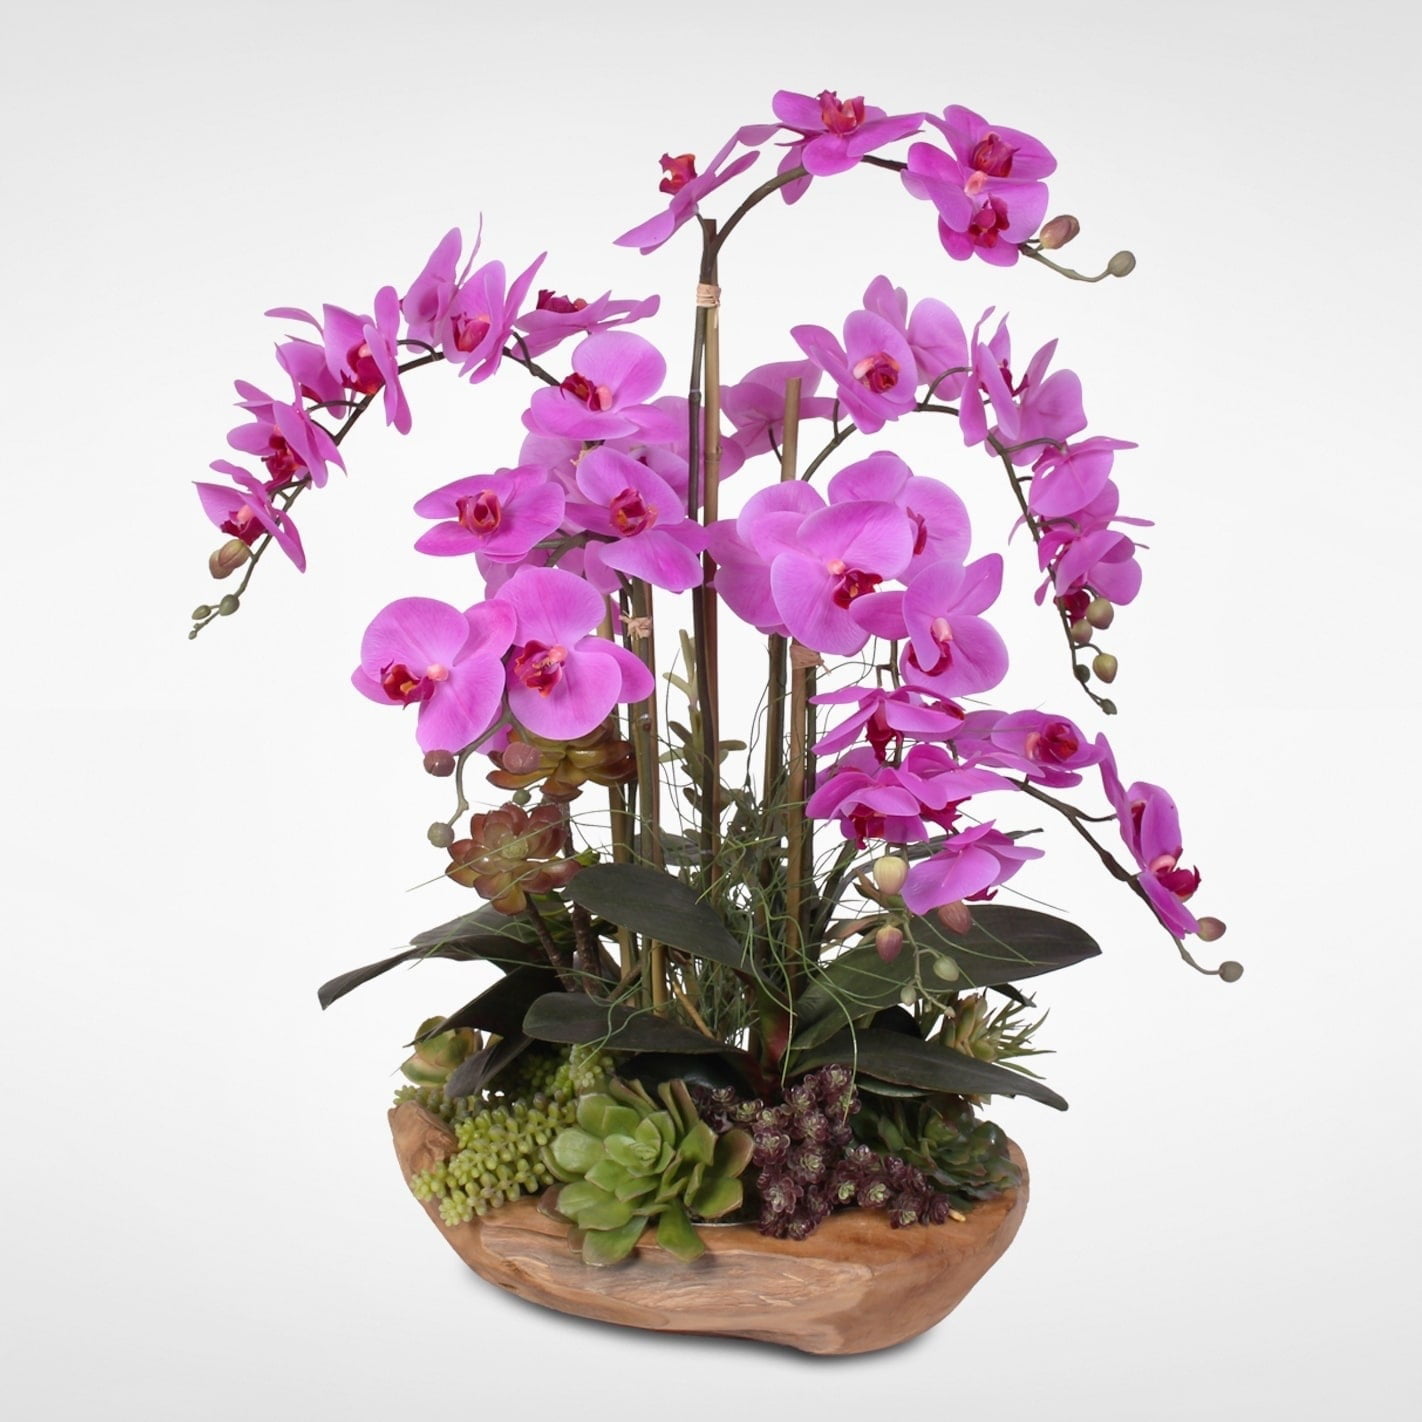 Purple Silk Orchids With Succulents in Wood Bowl - Walmart.com